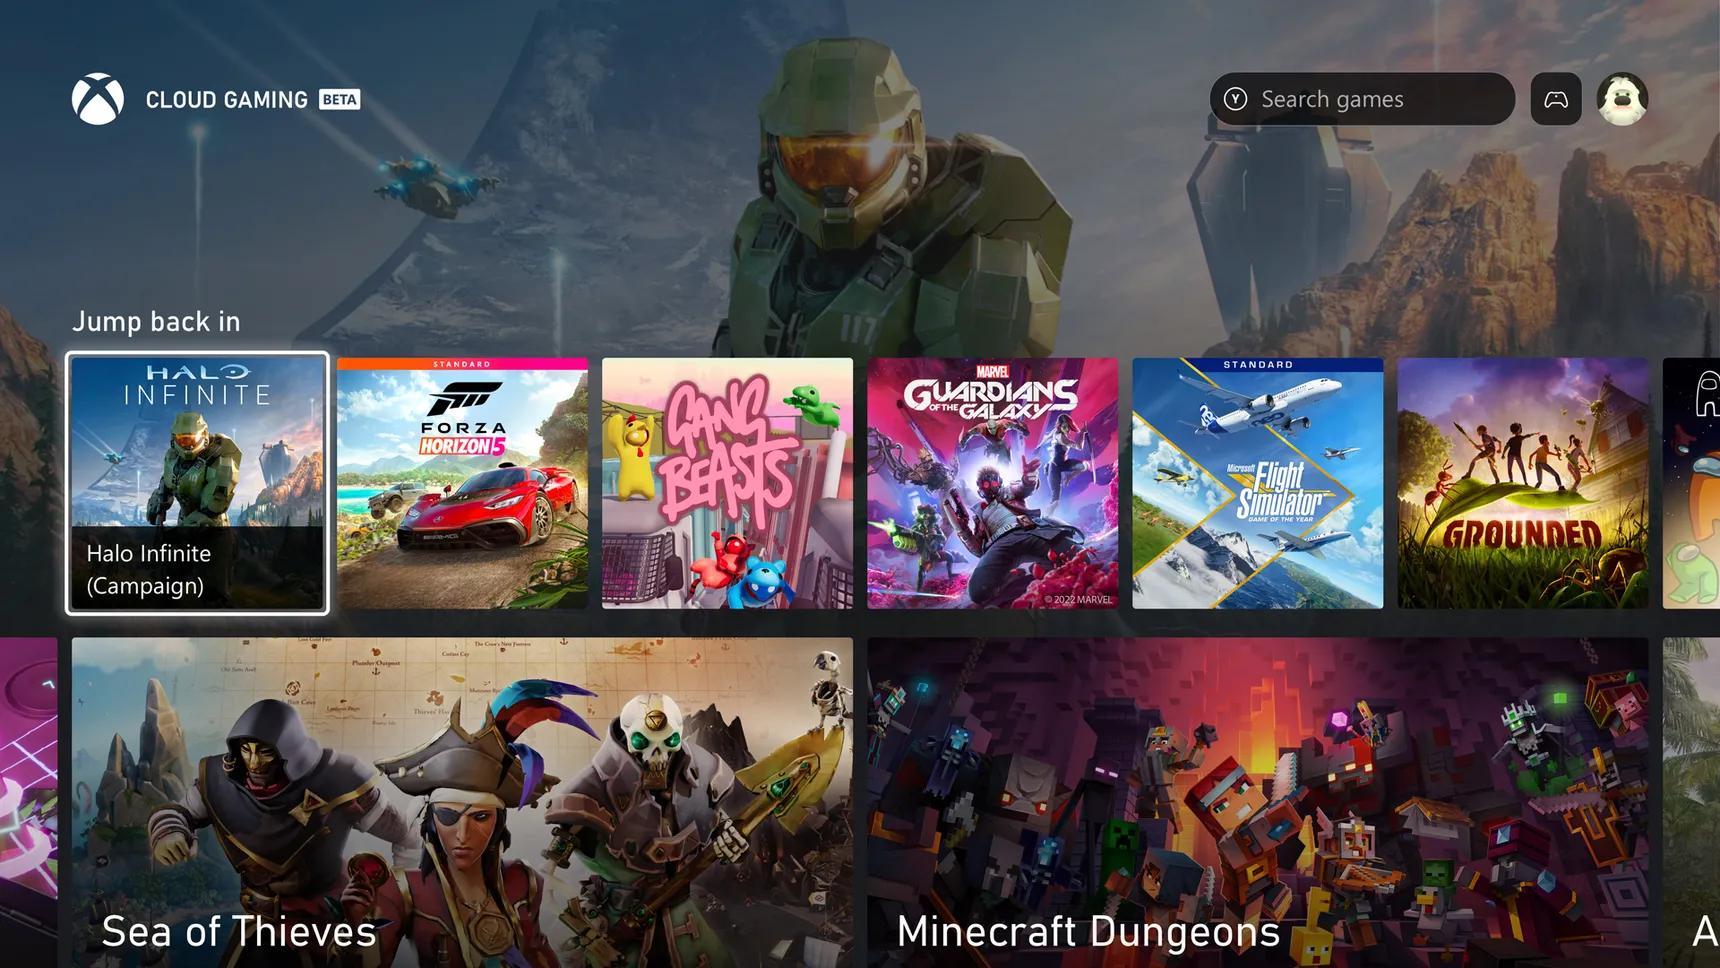 The Xbox TV app will run without a home device later this month